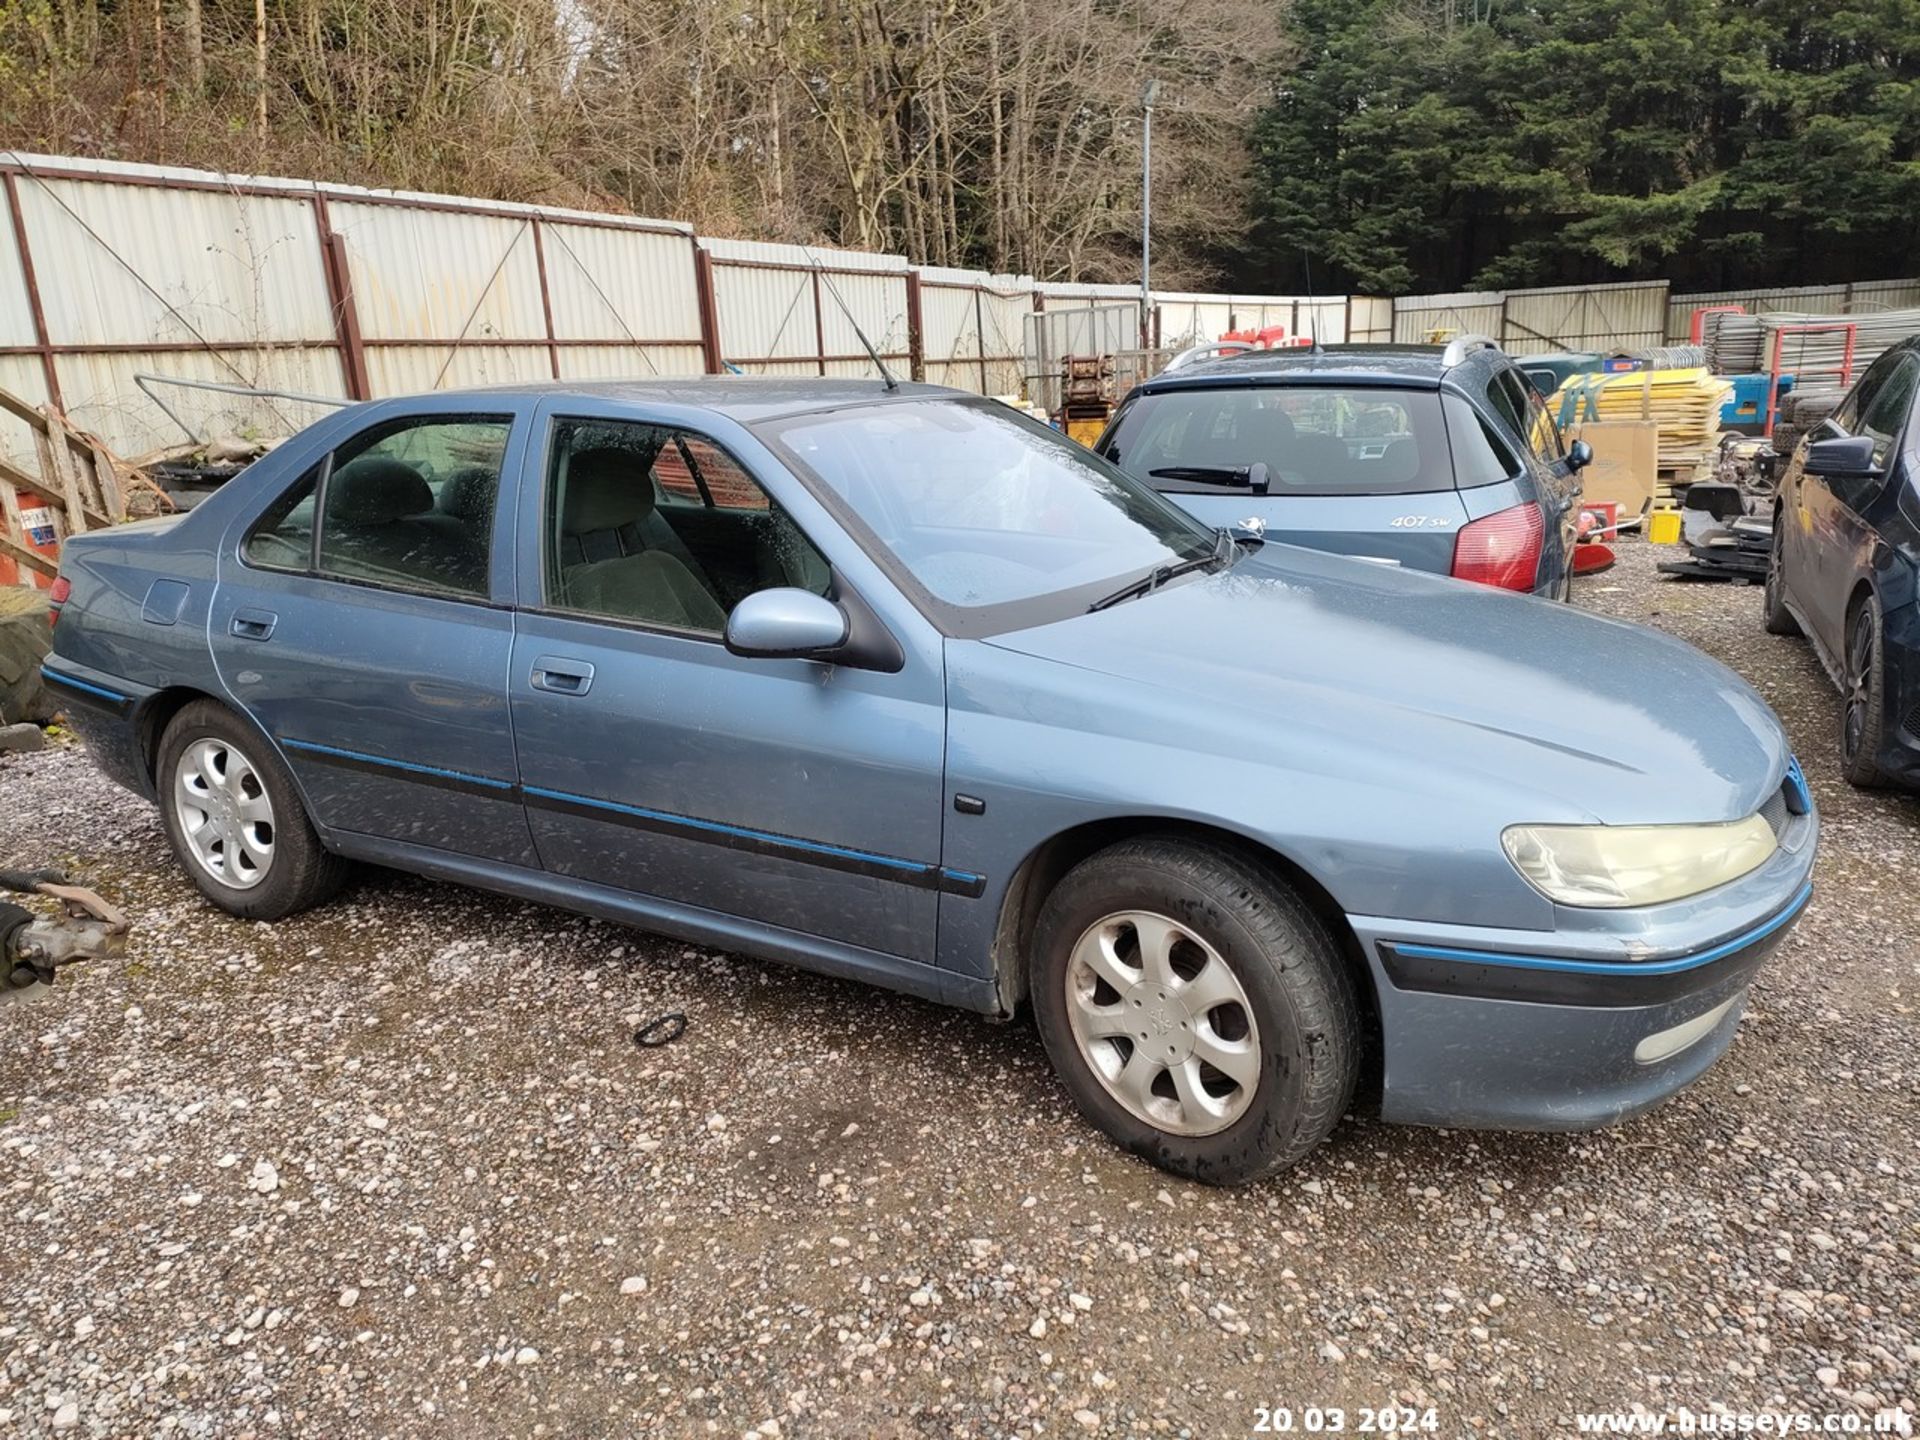 02/51 PEUGEOT 406 GTX HDI AUTO - 1997cc 4dr Saloon (Blue) - Image 44 of 59